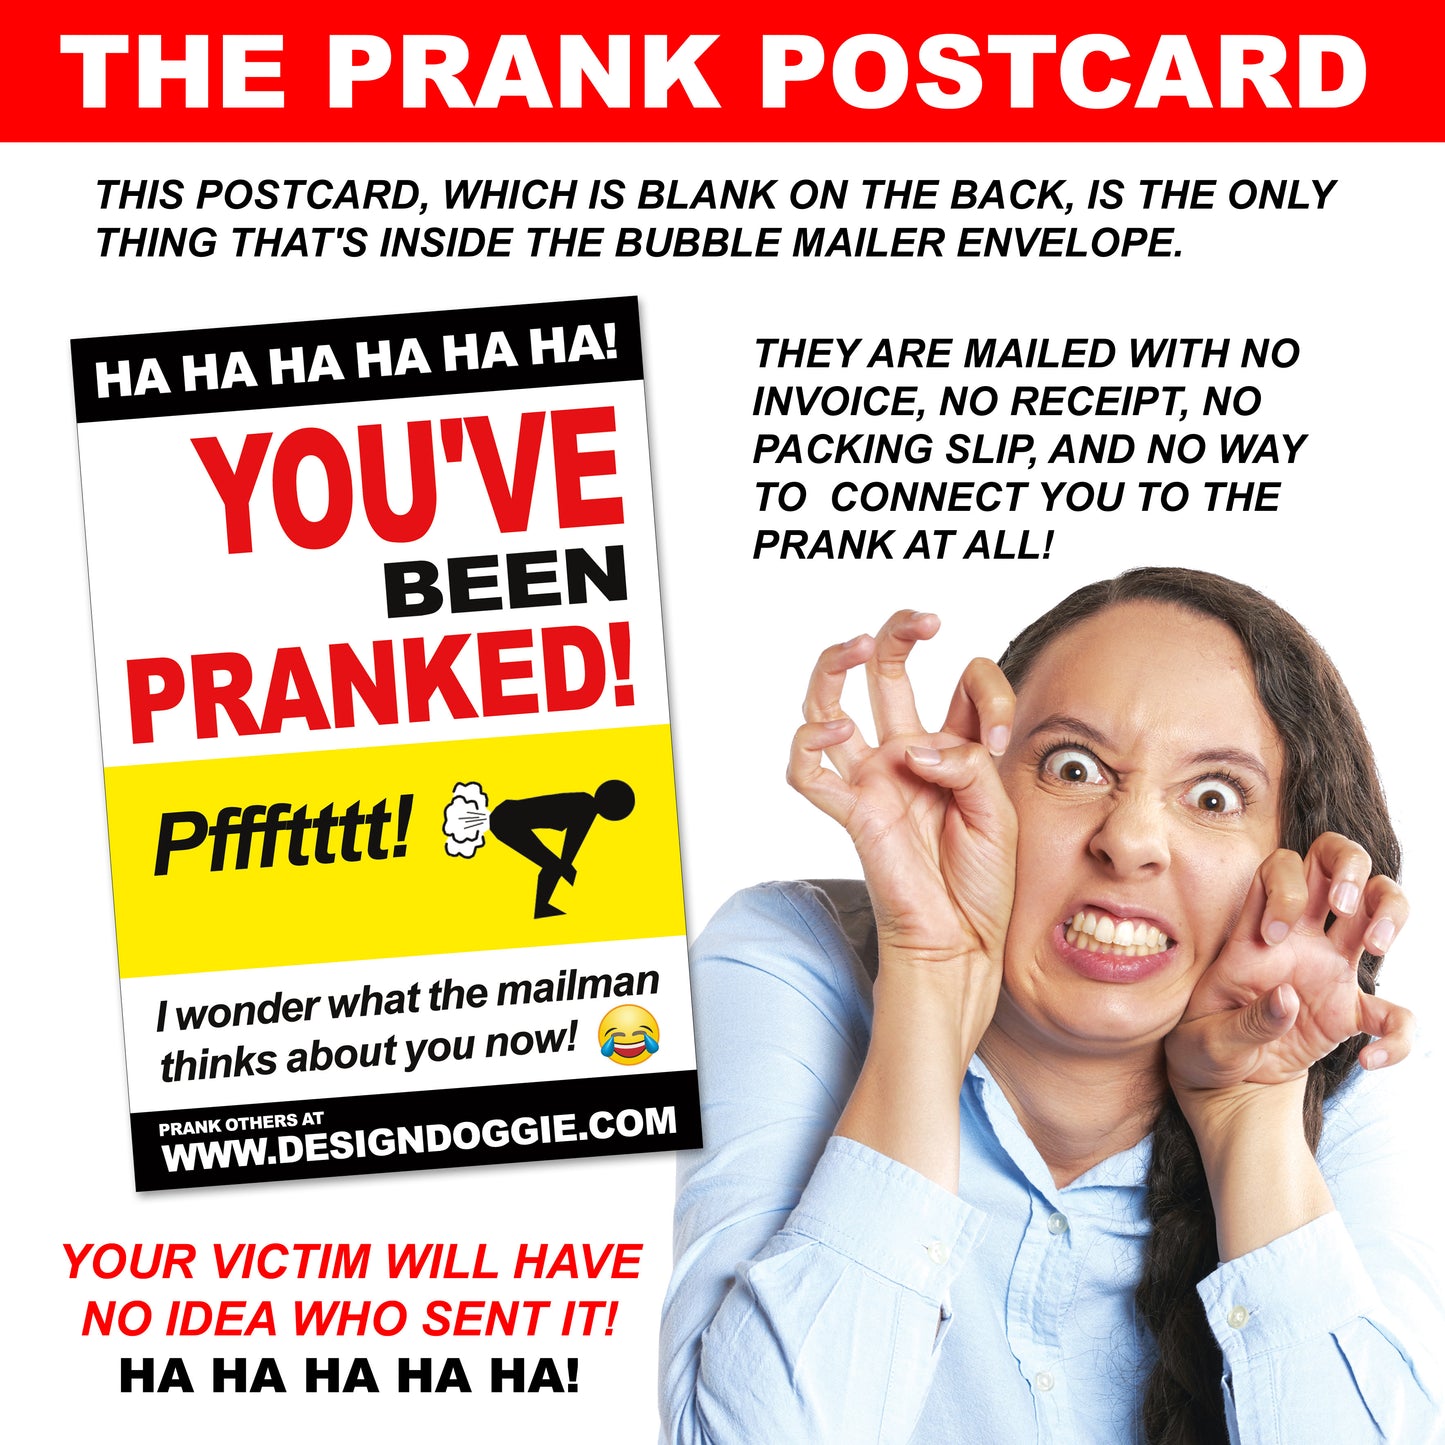 Mile High Club embarrassing prank envelope gets mailed directly to your victims 100% anonymously!